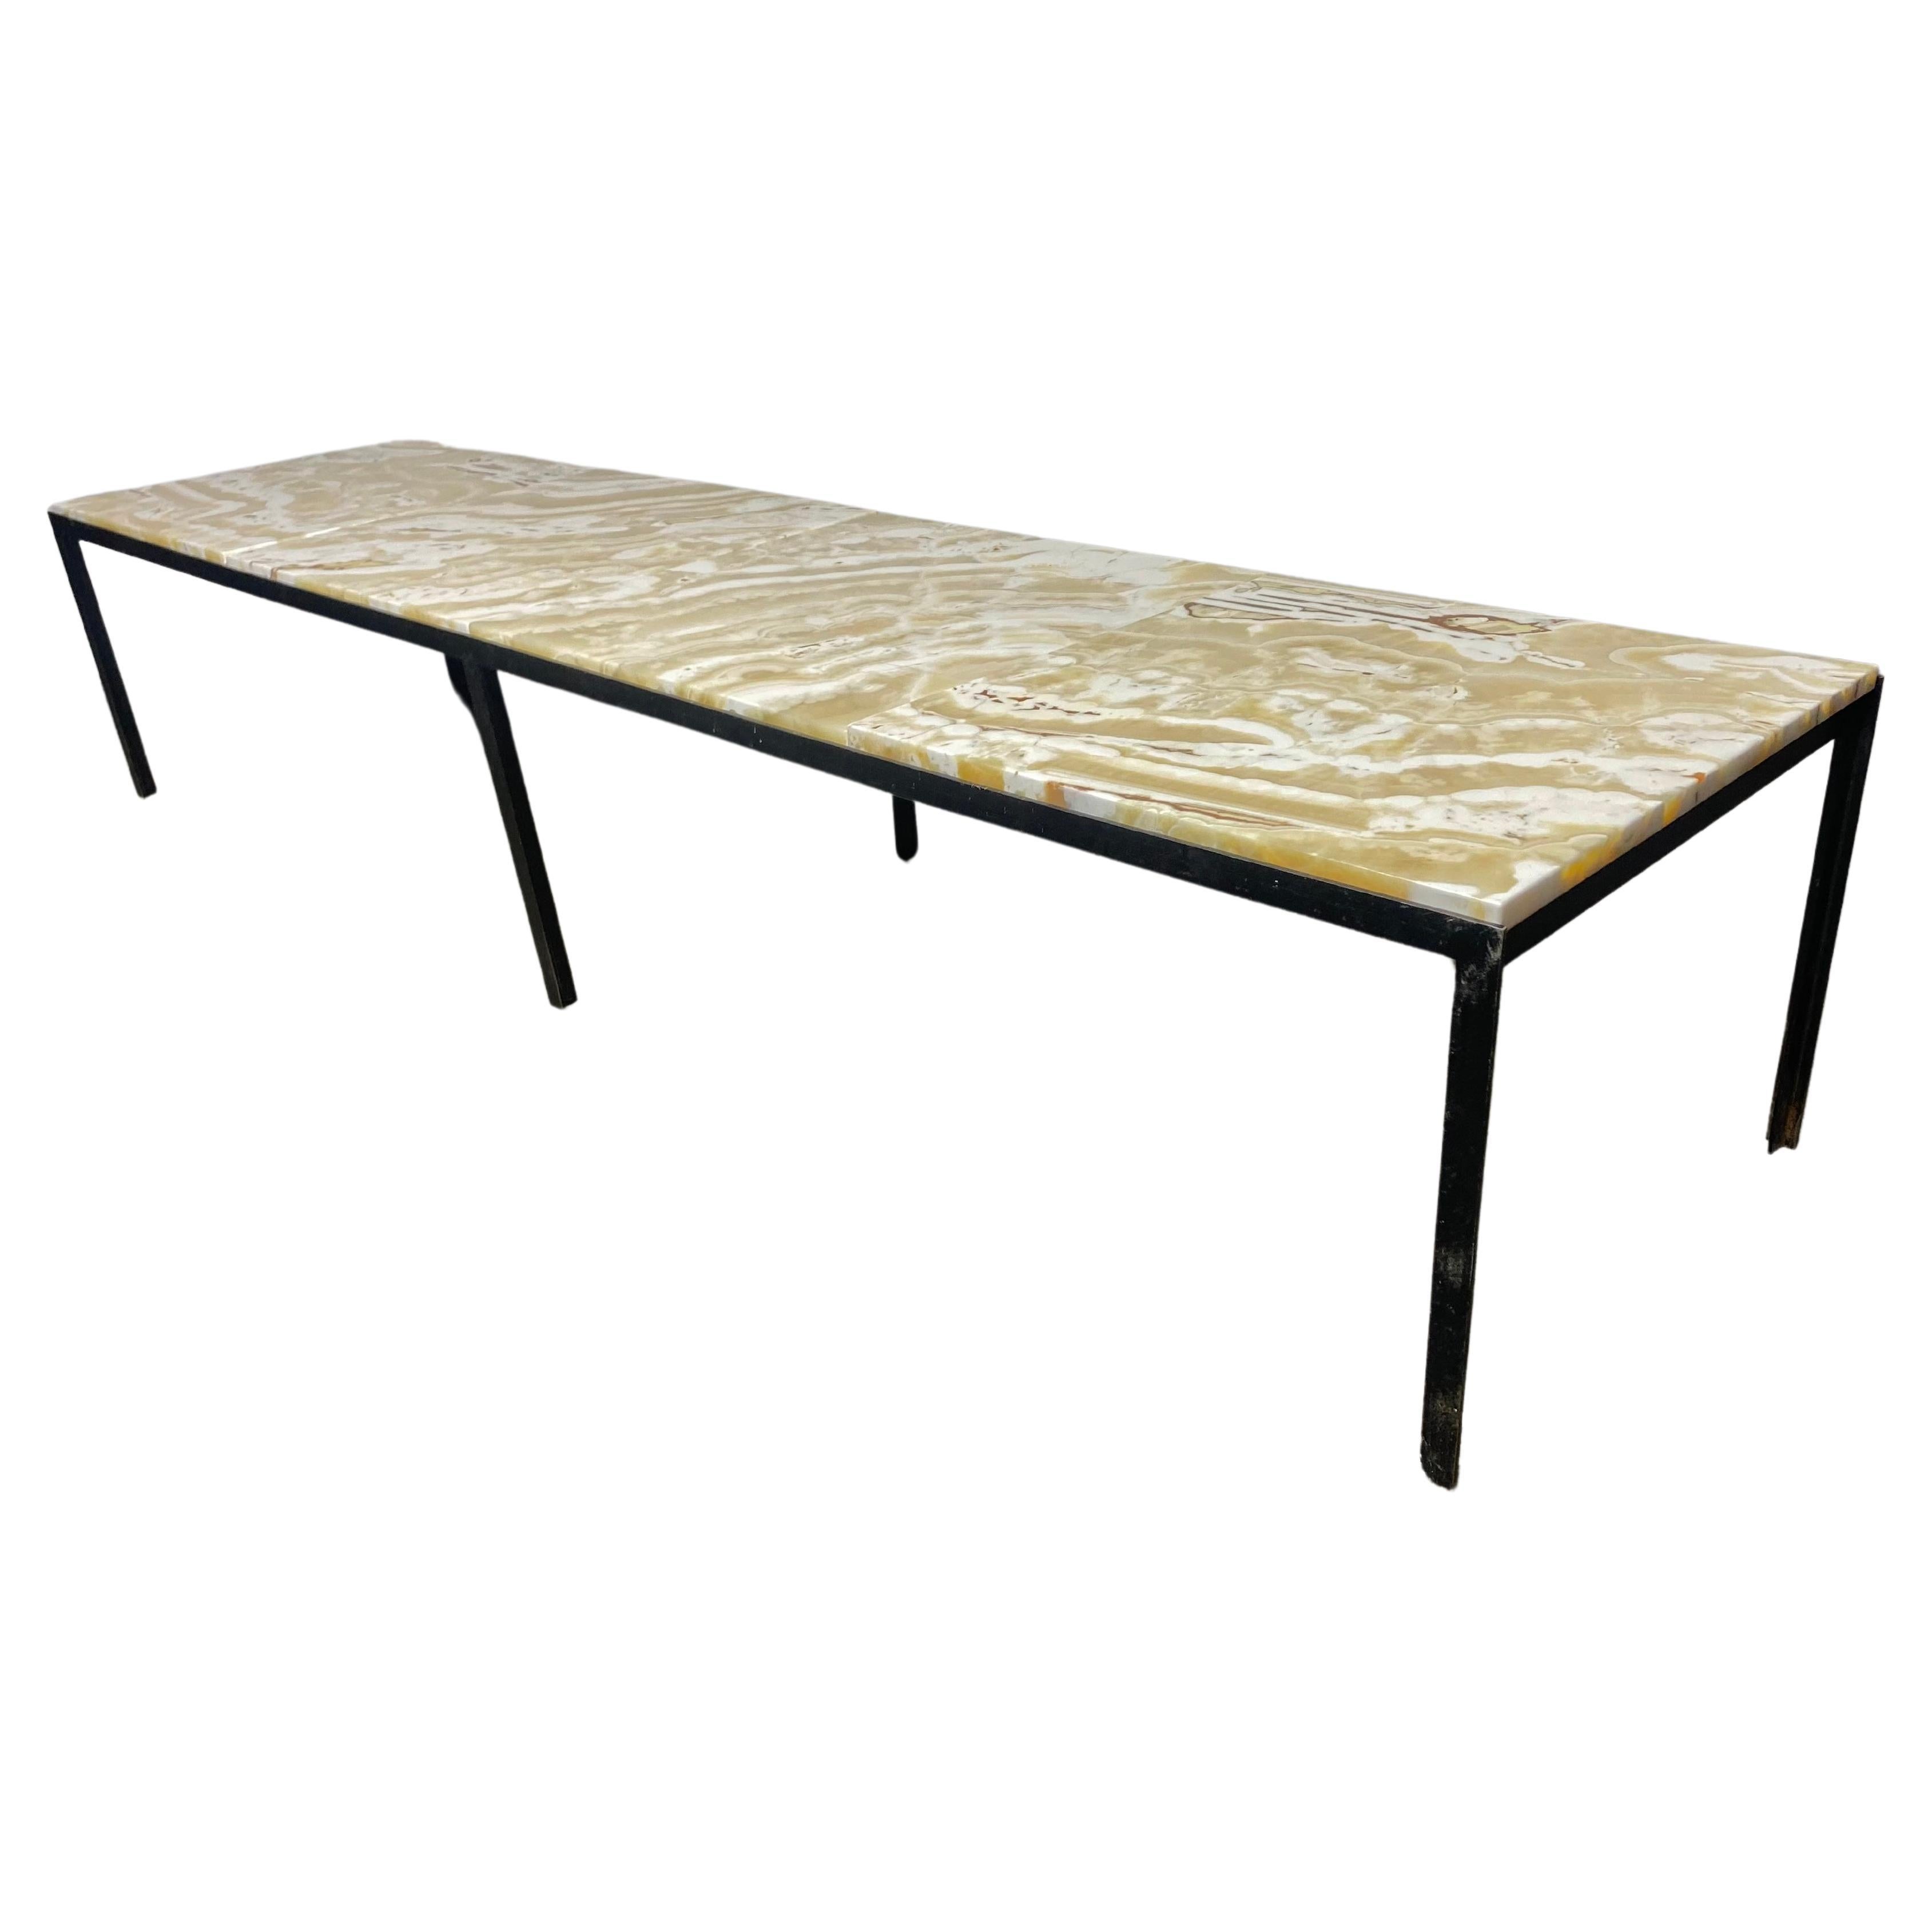 Early T Angle Onyx Coffee Table / Bench by Florence Knoll # 332 for Knoll  For Sale